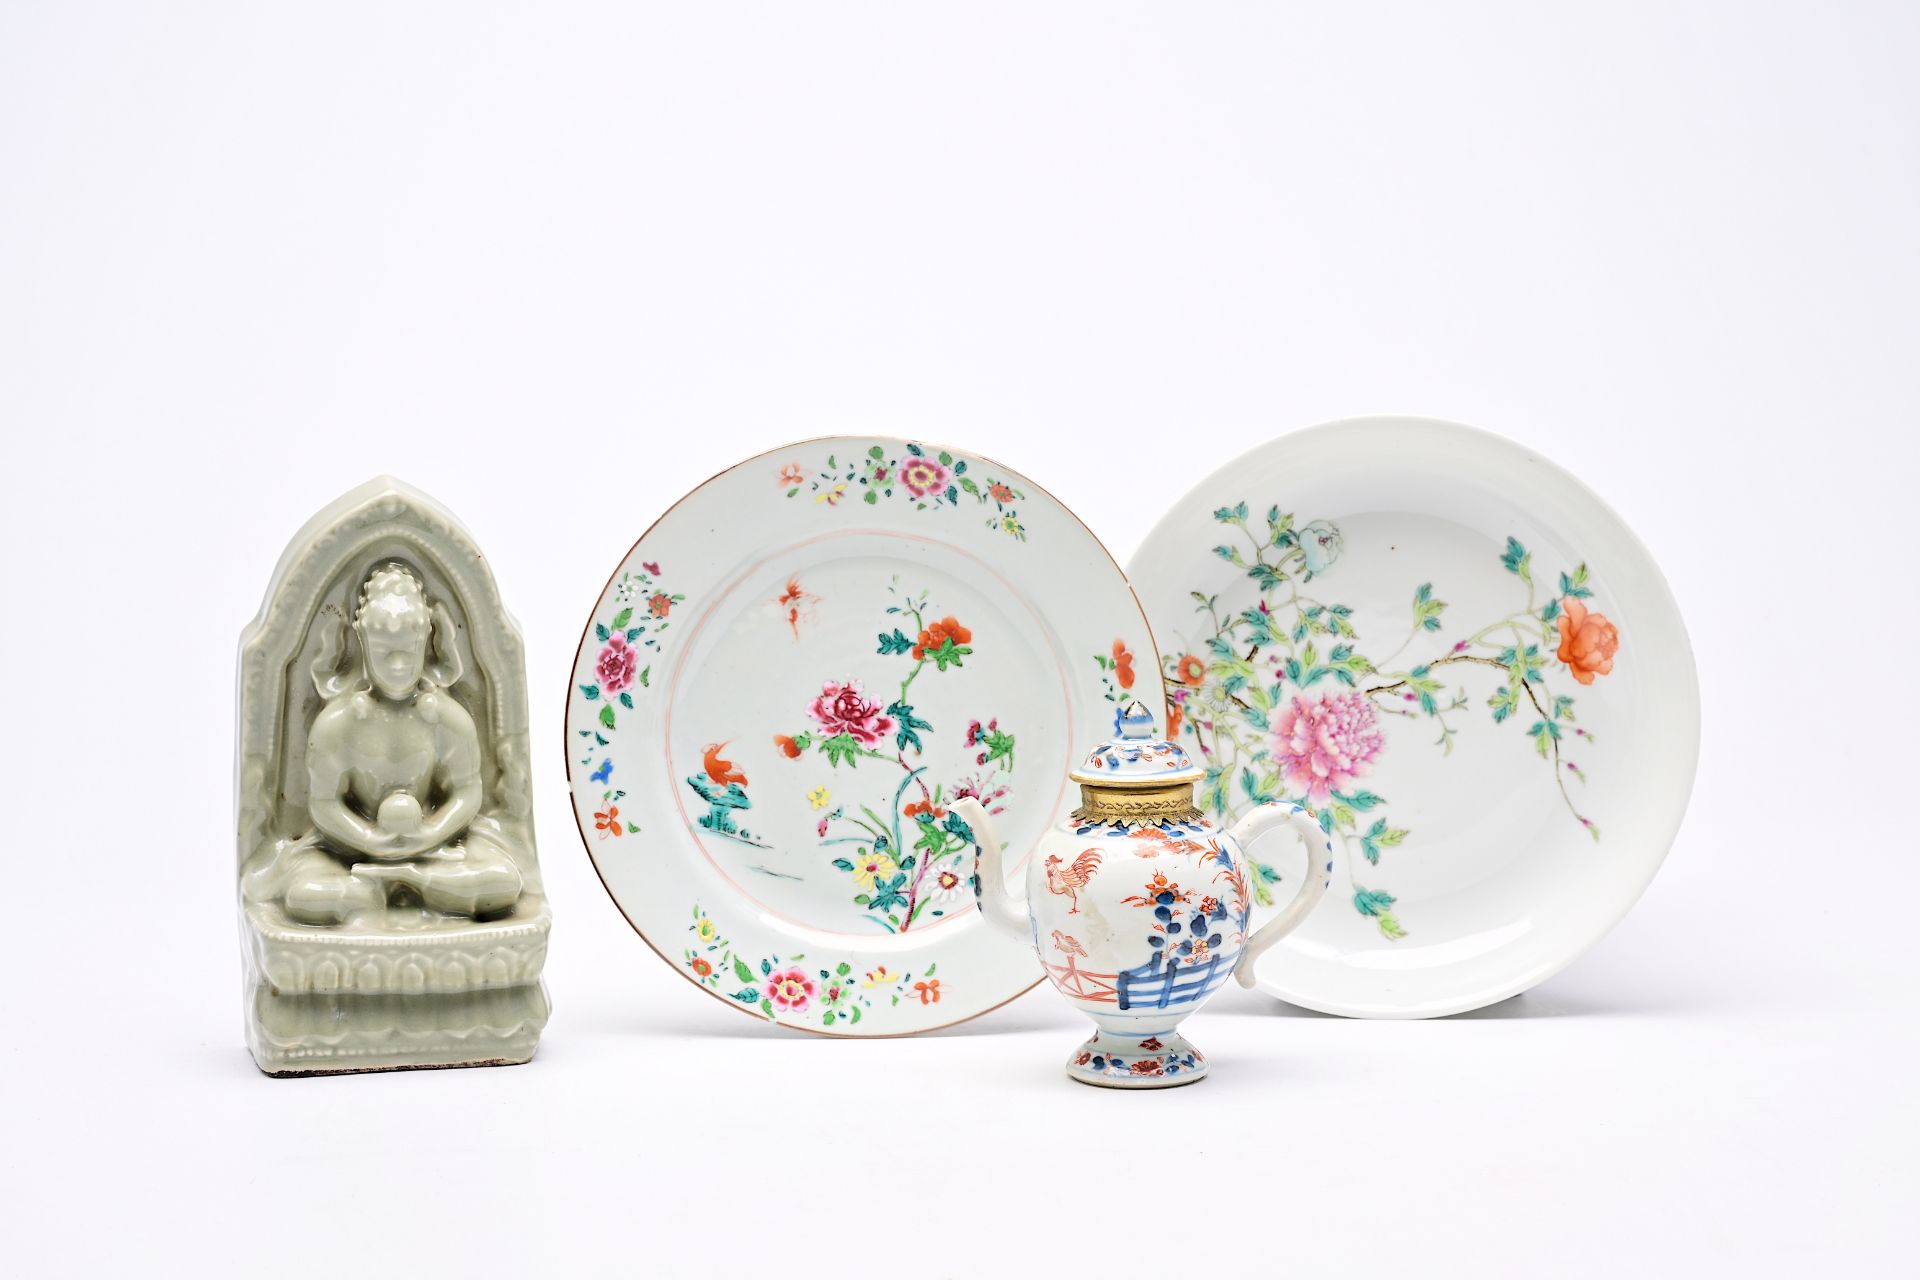 A Chinese Imari style teapot, two famille rose plates with floral design and a celadon 'Buddha' figu - Image 2 of 6